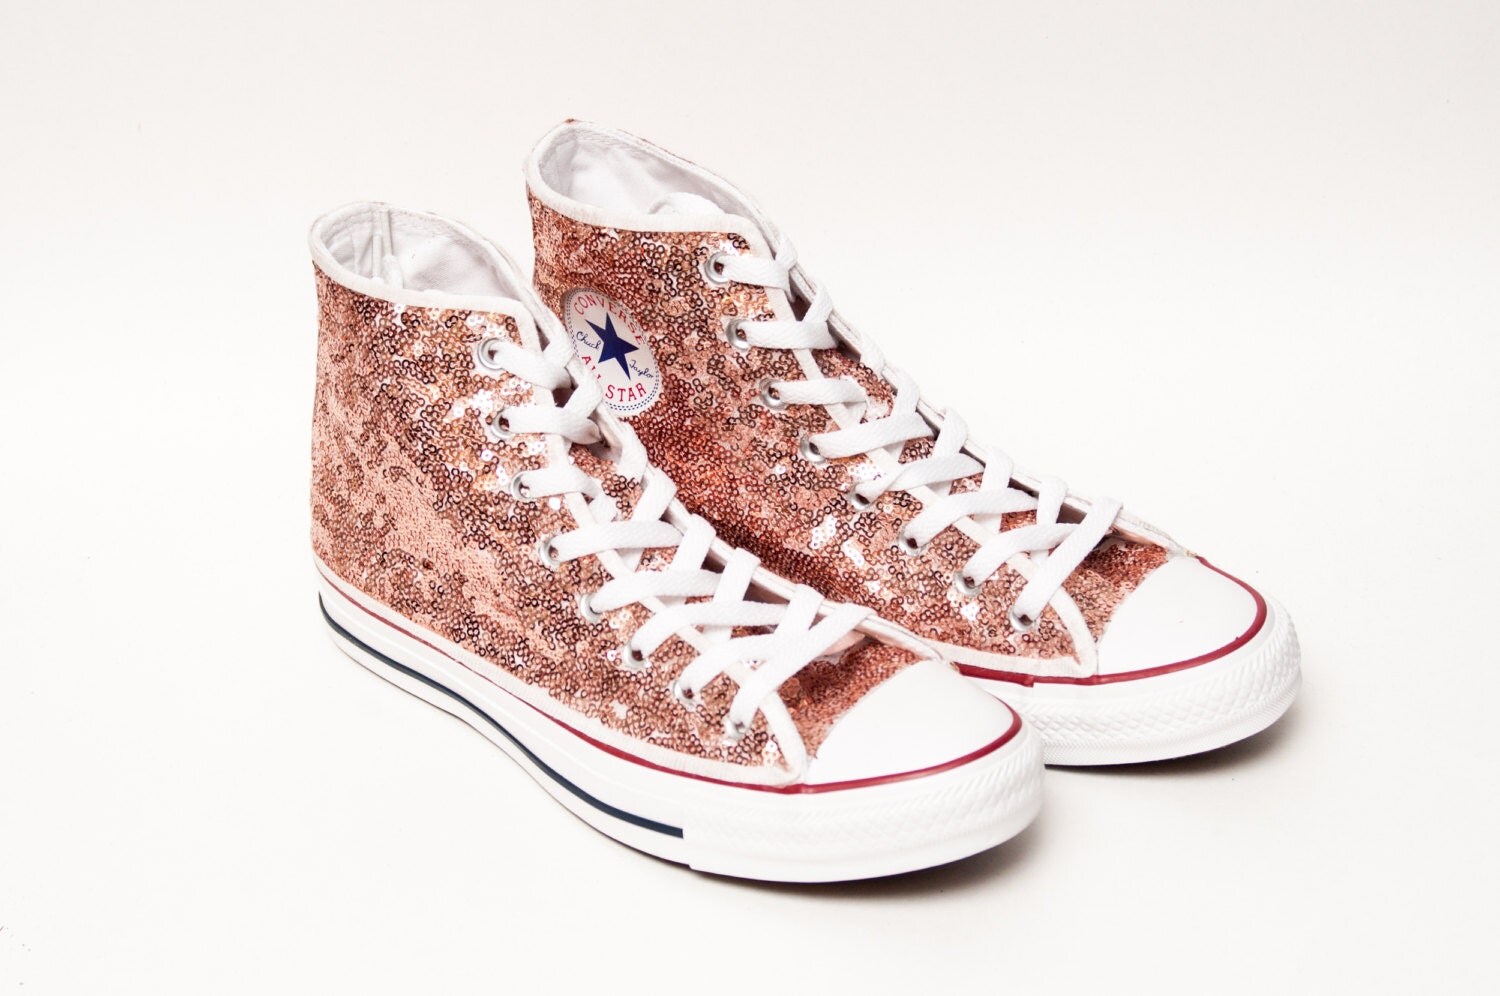 Sequin Rose Gold Canvas Customized Converse by princesspumps